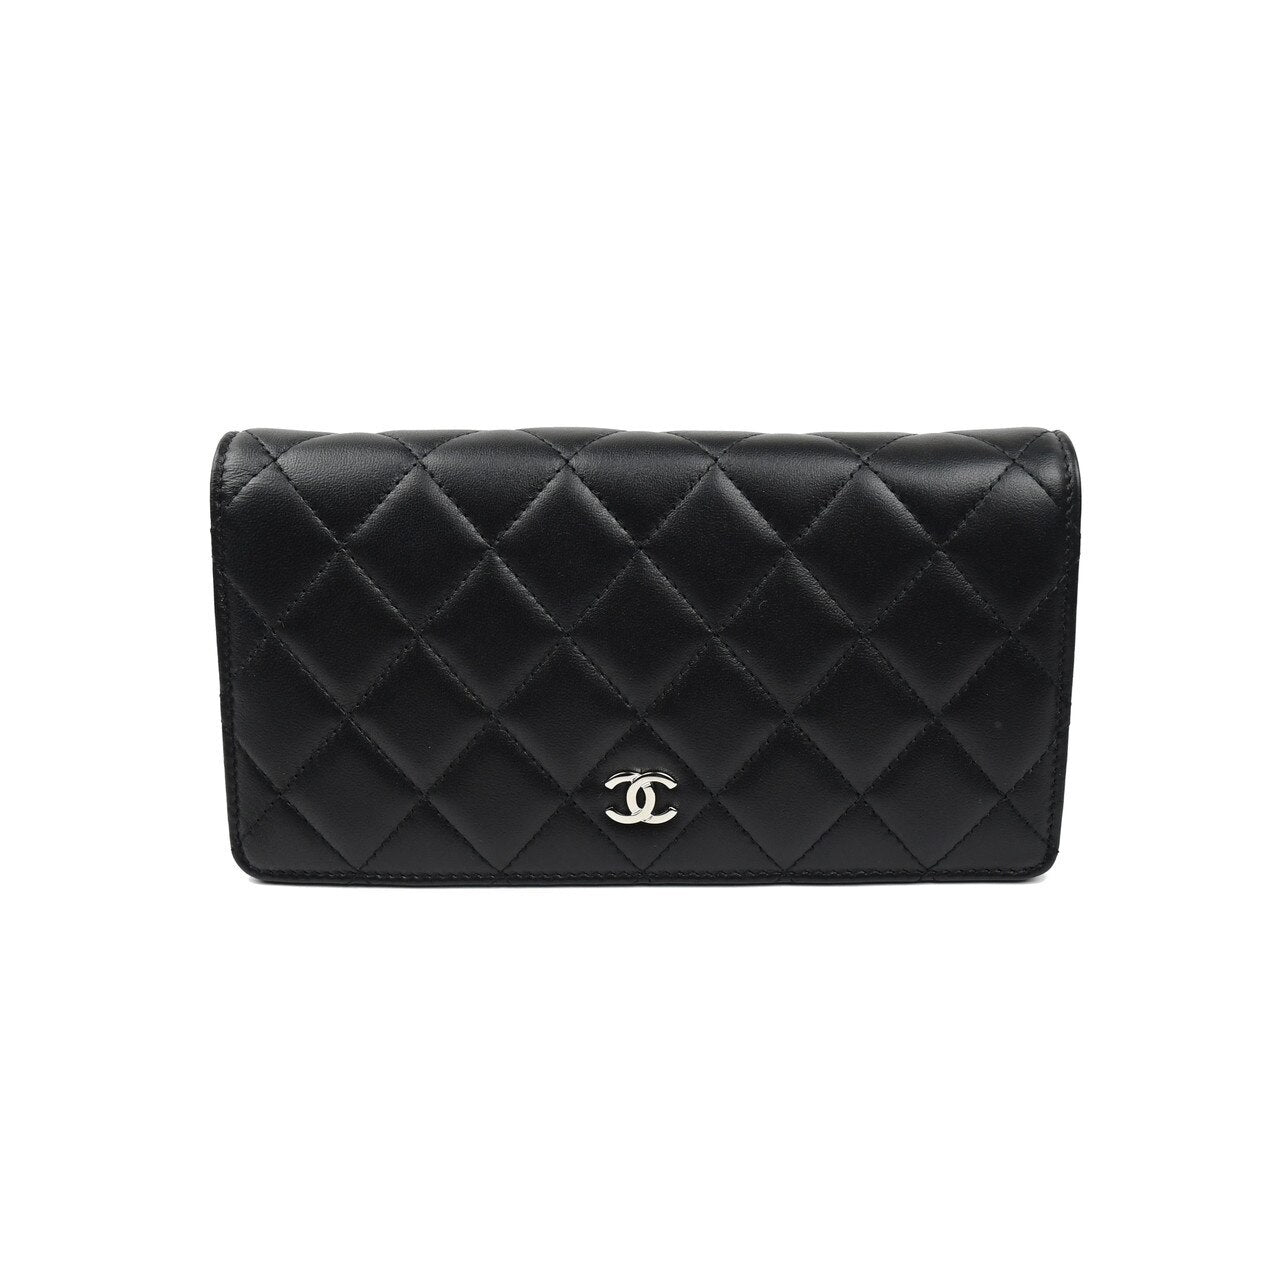 Second-hand CHANEL Chanel plaid leather long wallet Silver with flaws  Italian high vintage jewelry - Shop Mr.Travel Genius Antique shop Wallets -  Pinkoi